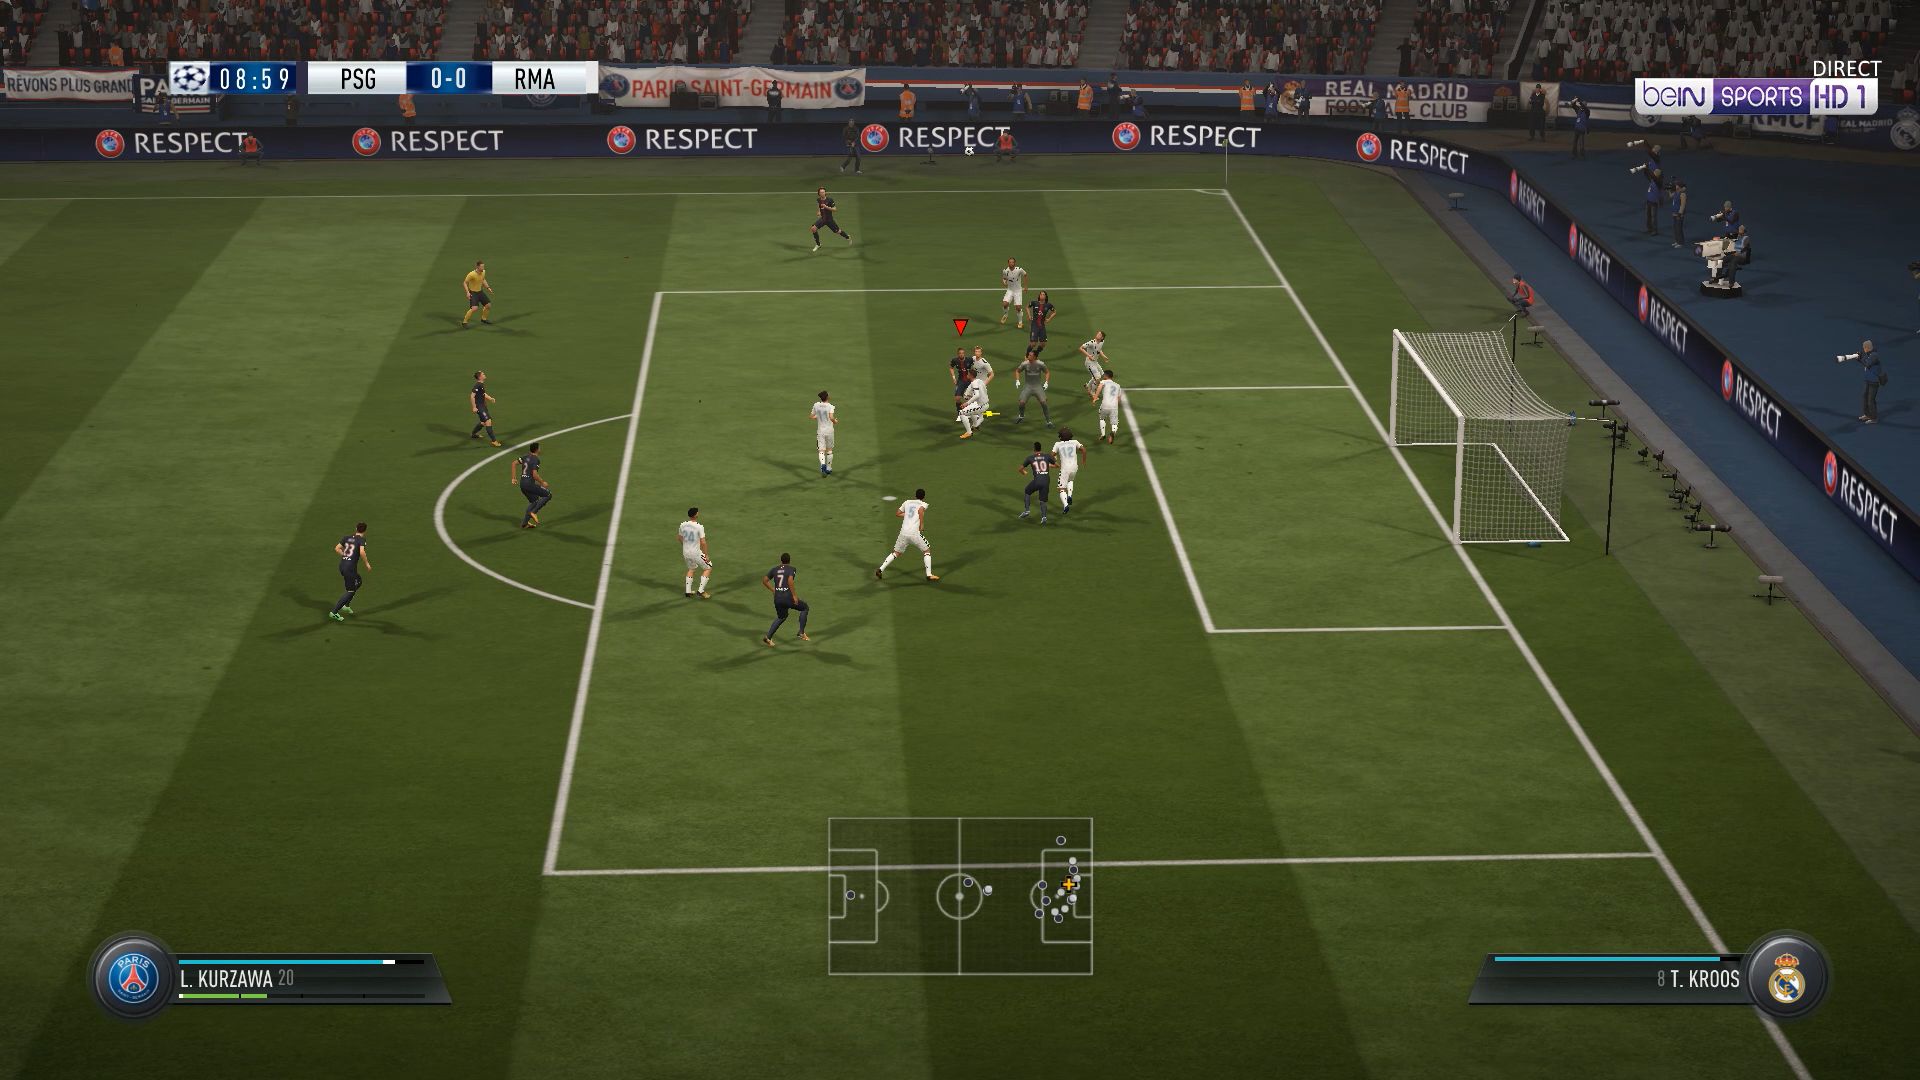 How to Play the UEFA Champions League in FIFA 18, by Uebmaster